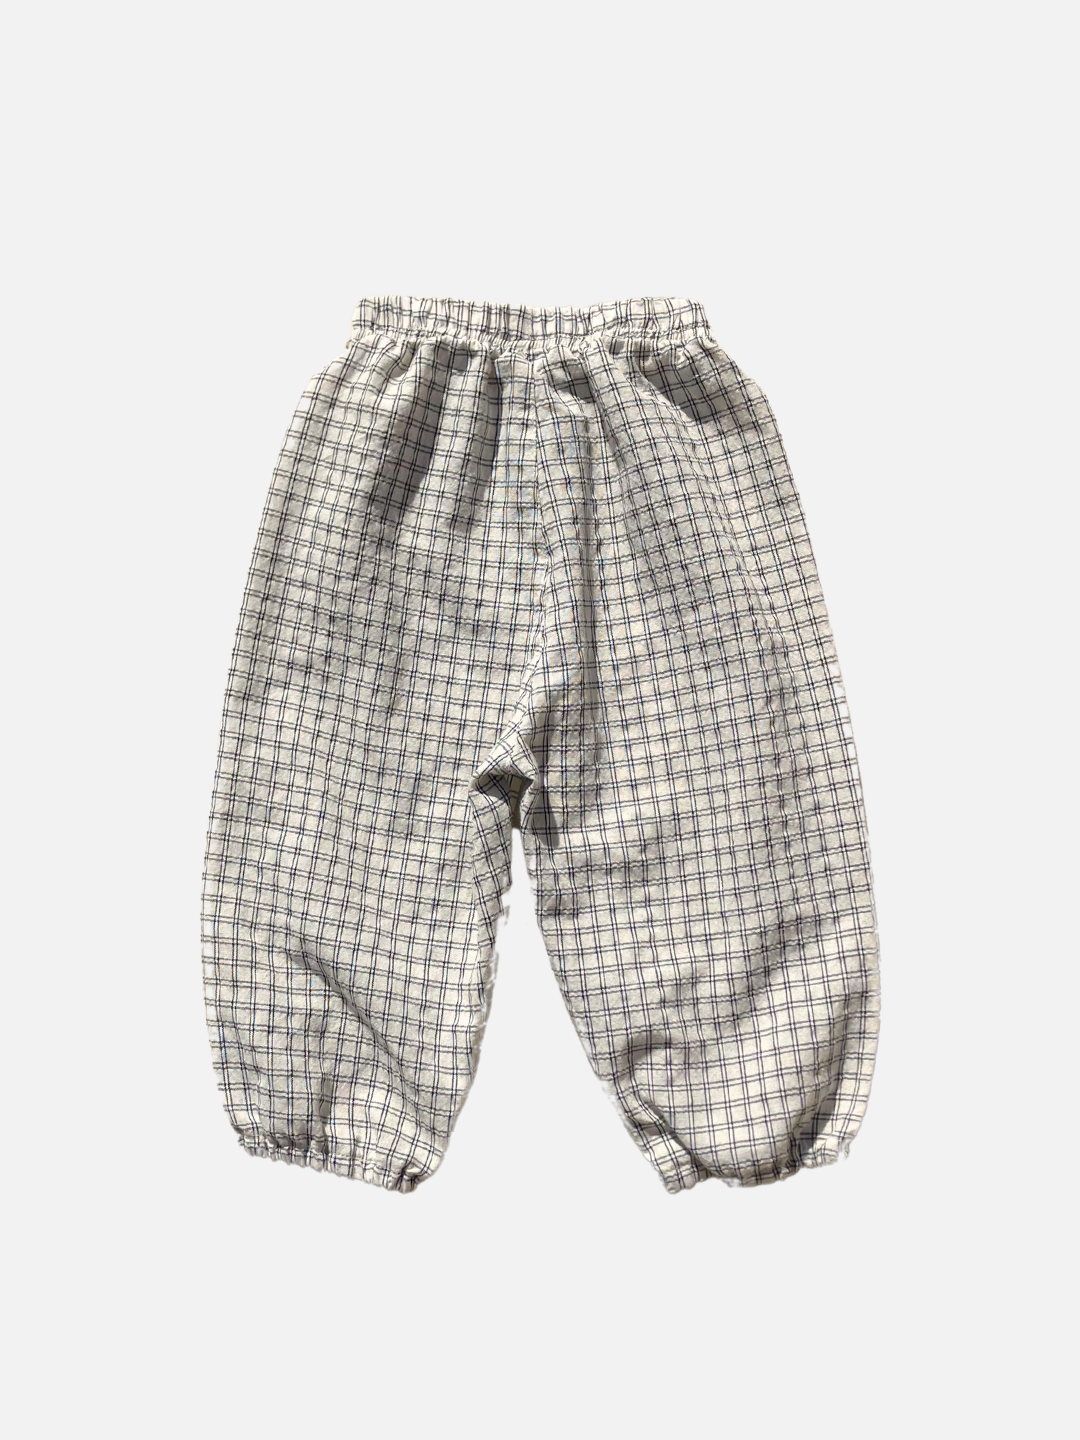 Back view of the kids' Grid Check Pull on Pant. Cream fabric with light black grid print.